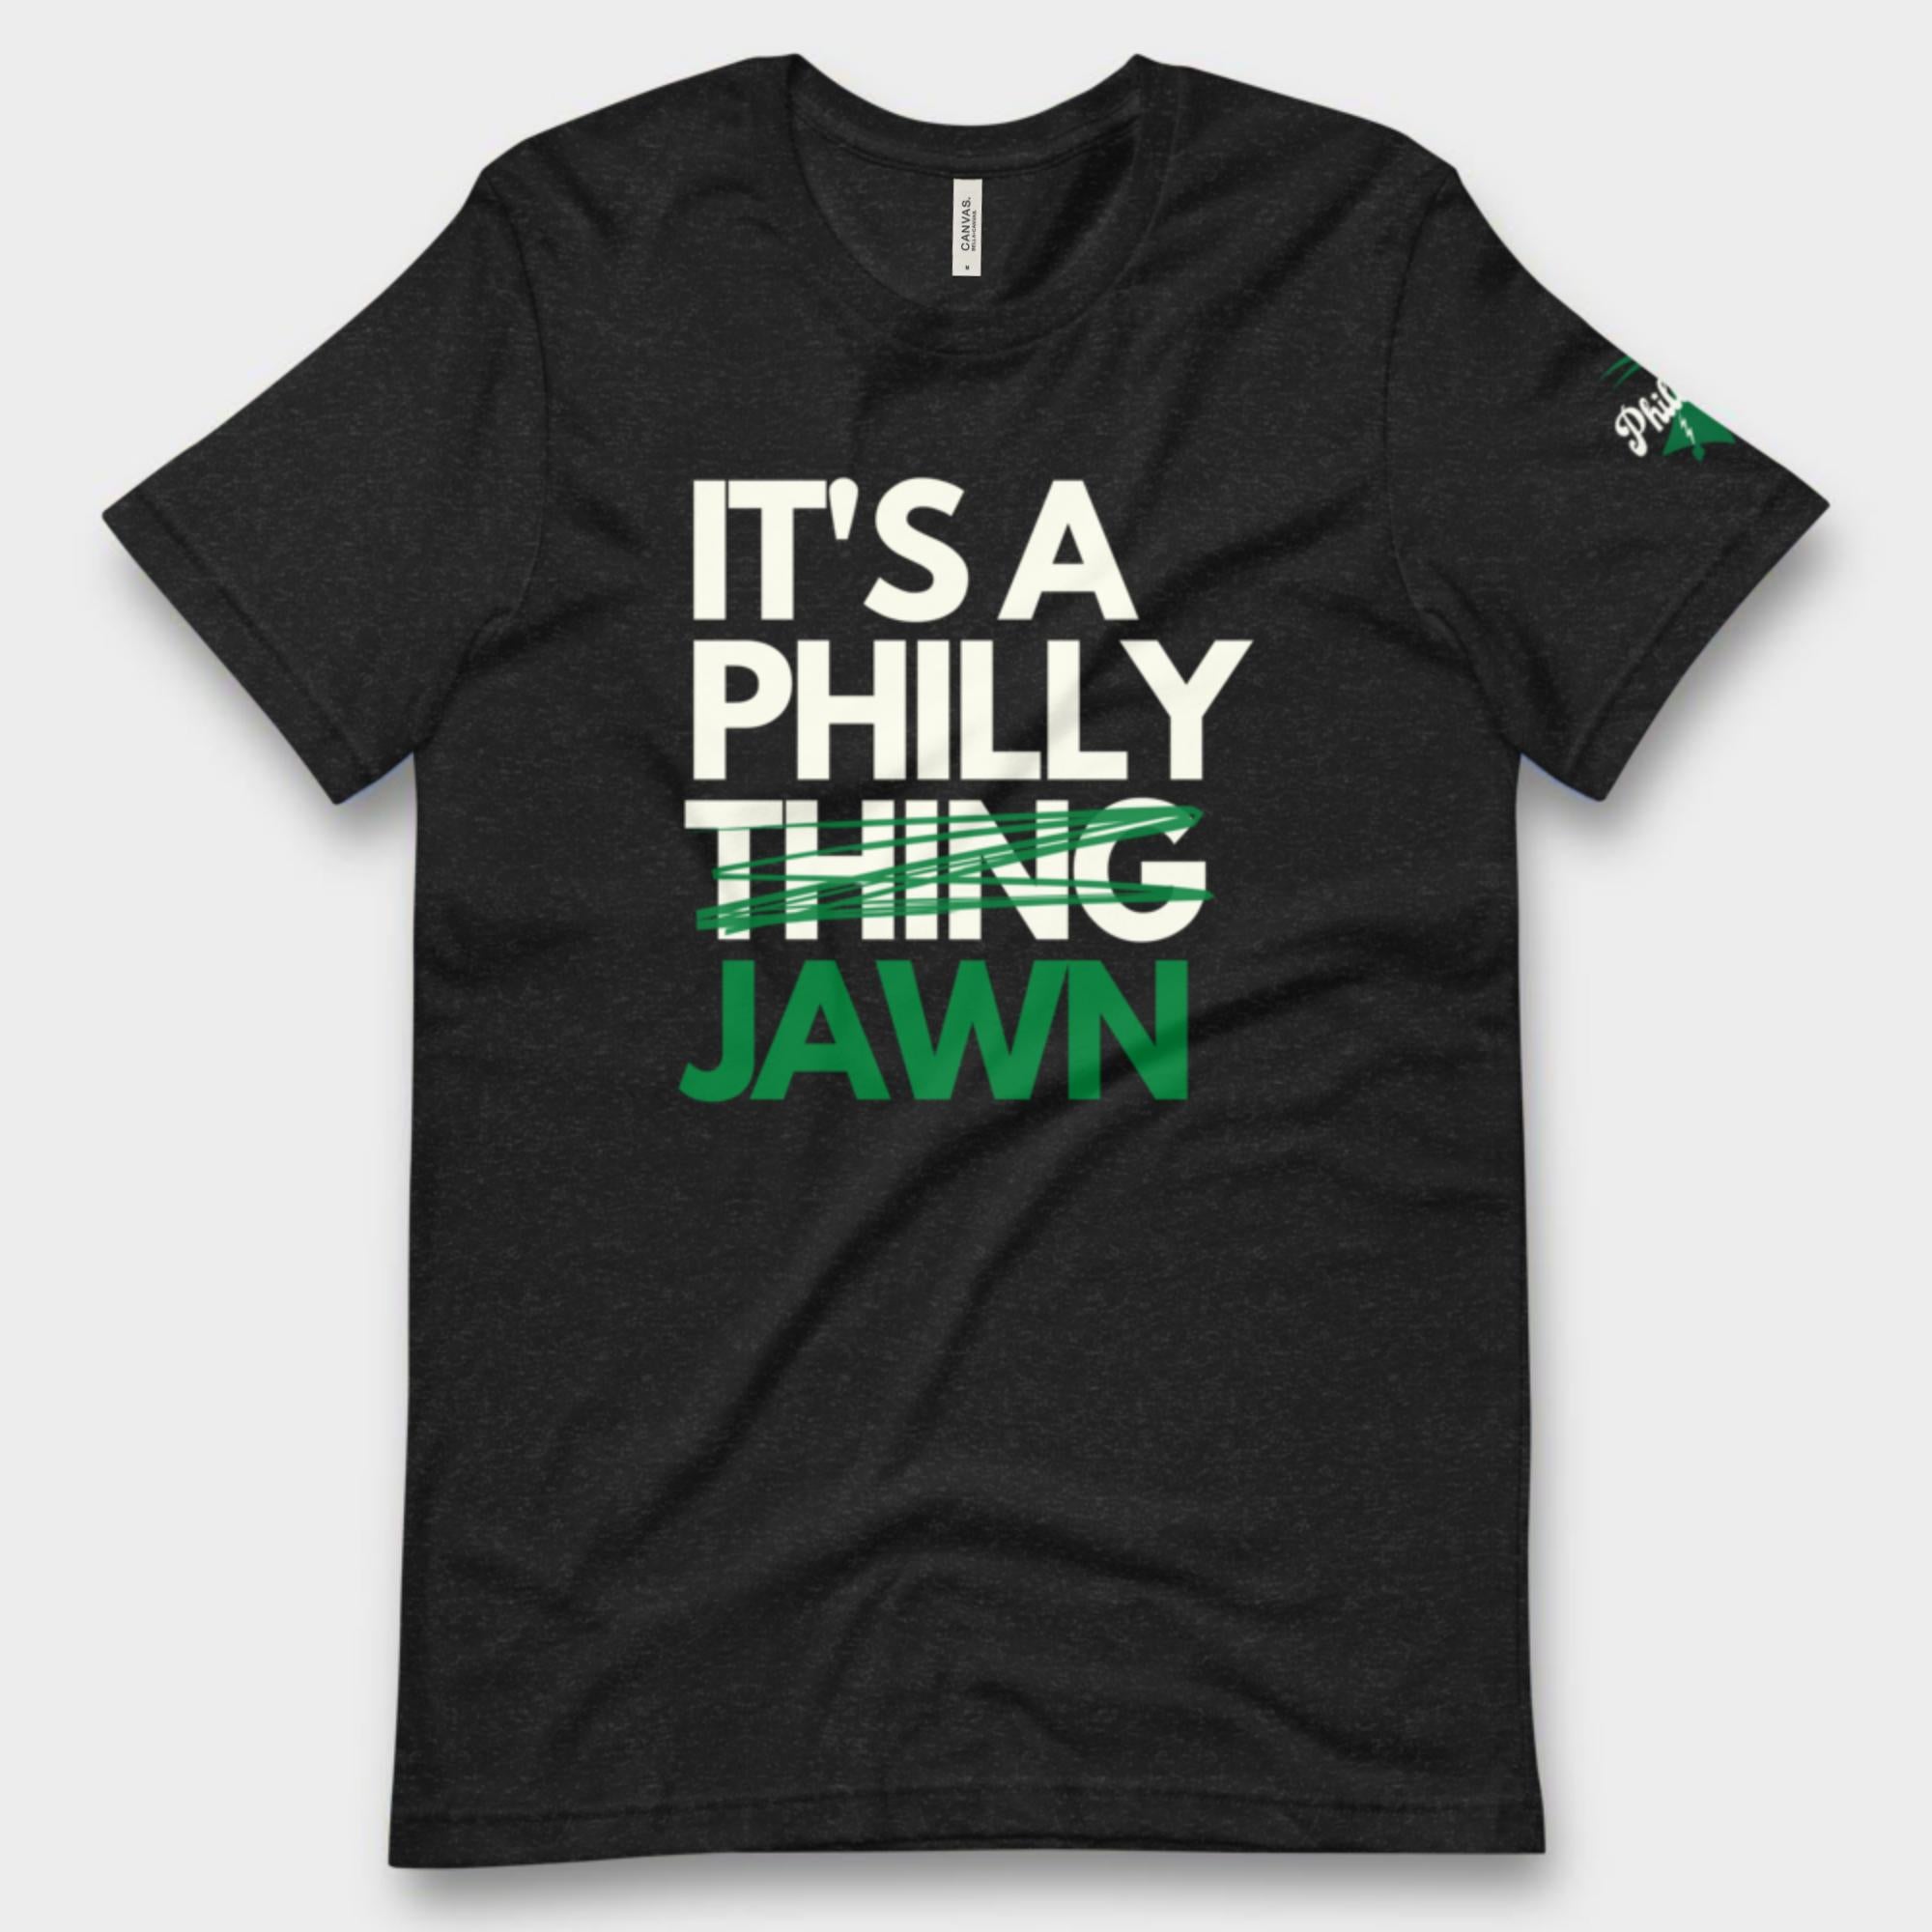 "It's a Philly Jawn" Tee